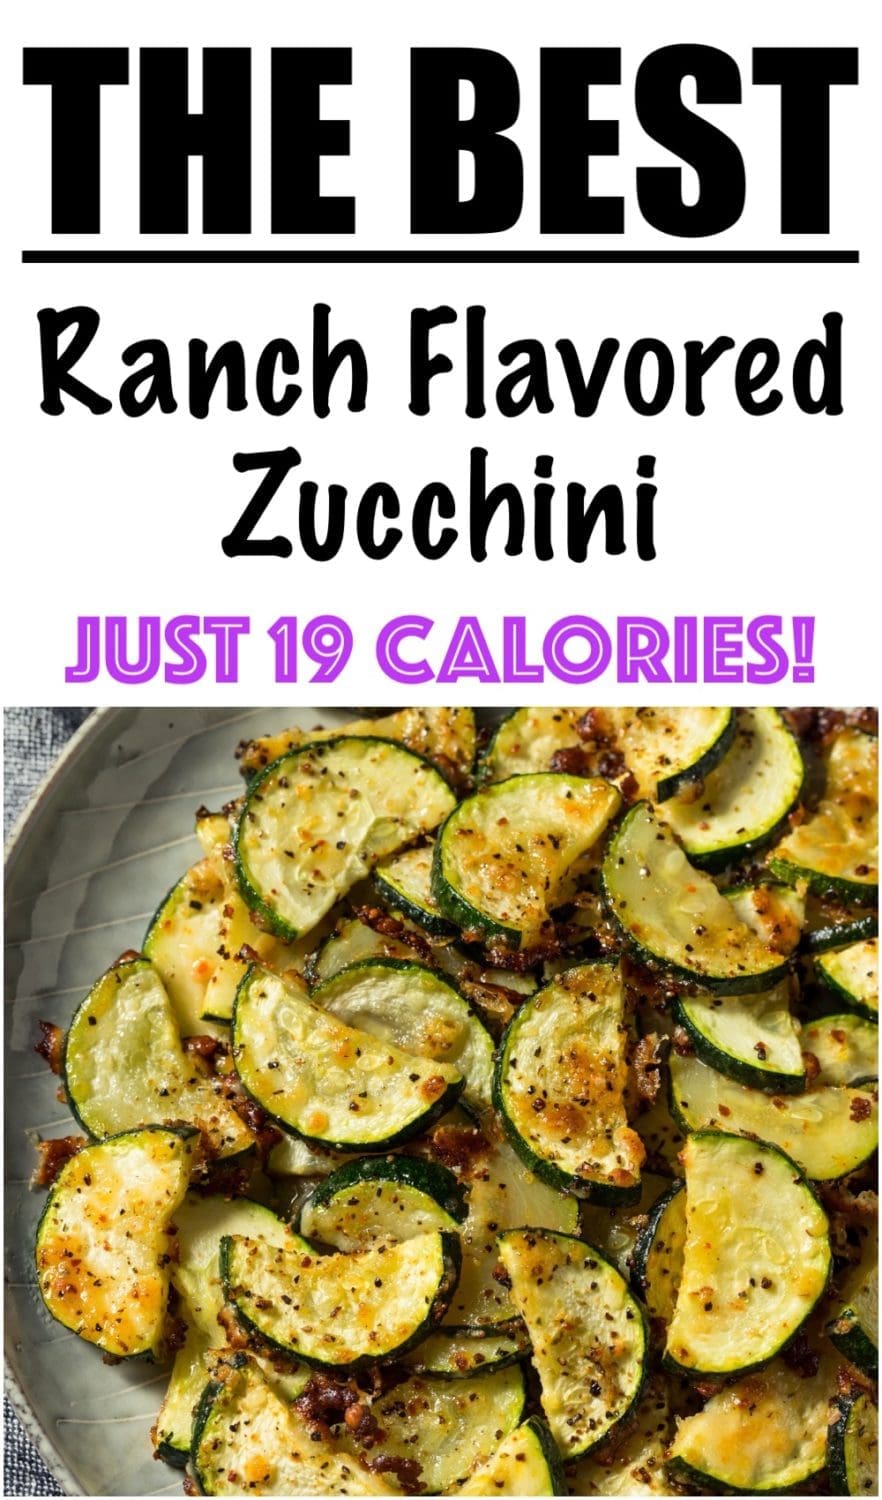 Ranch Flavored Oven Baked Zucchini